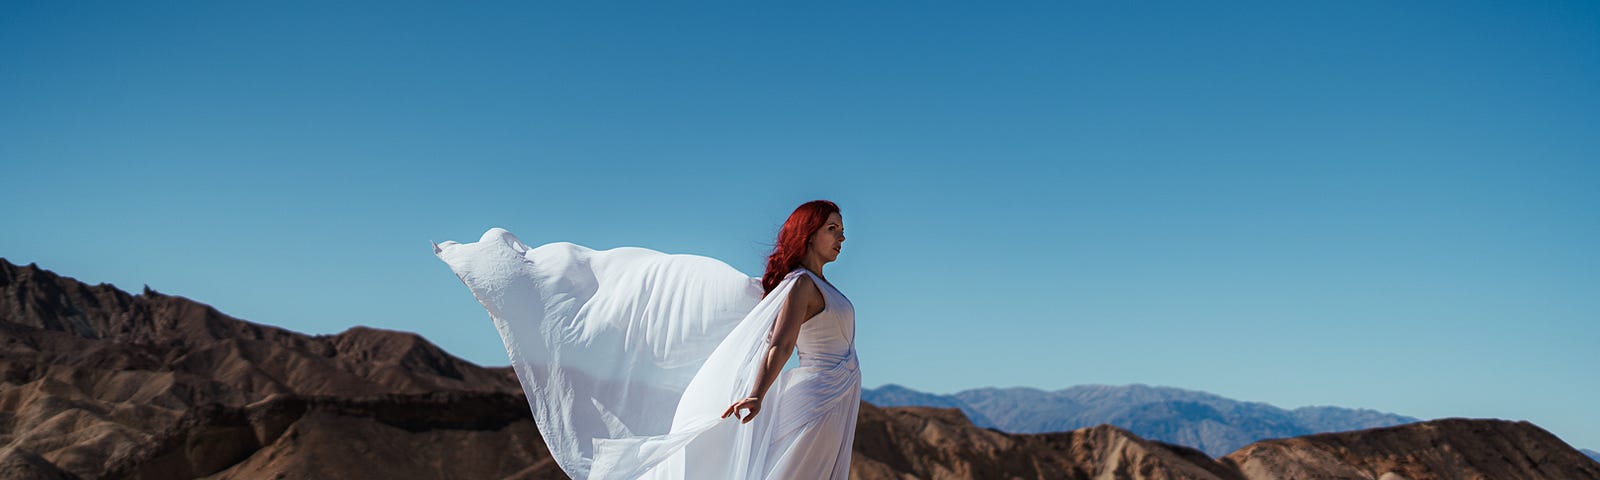 A woman dressed in a white flowing dress, which is blowing in the wind. She is standing on a rocky hill in desert terrain.